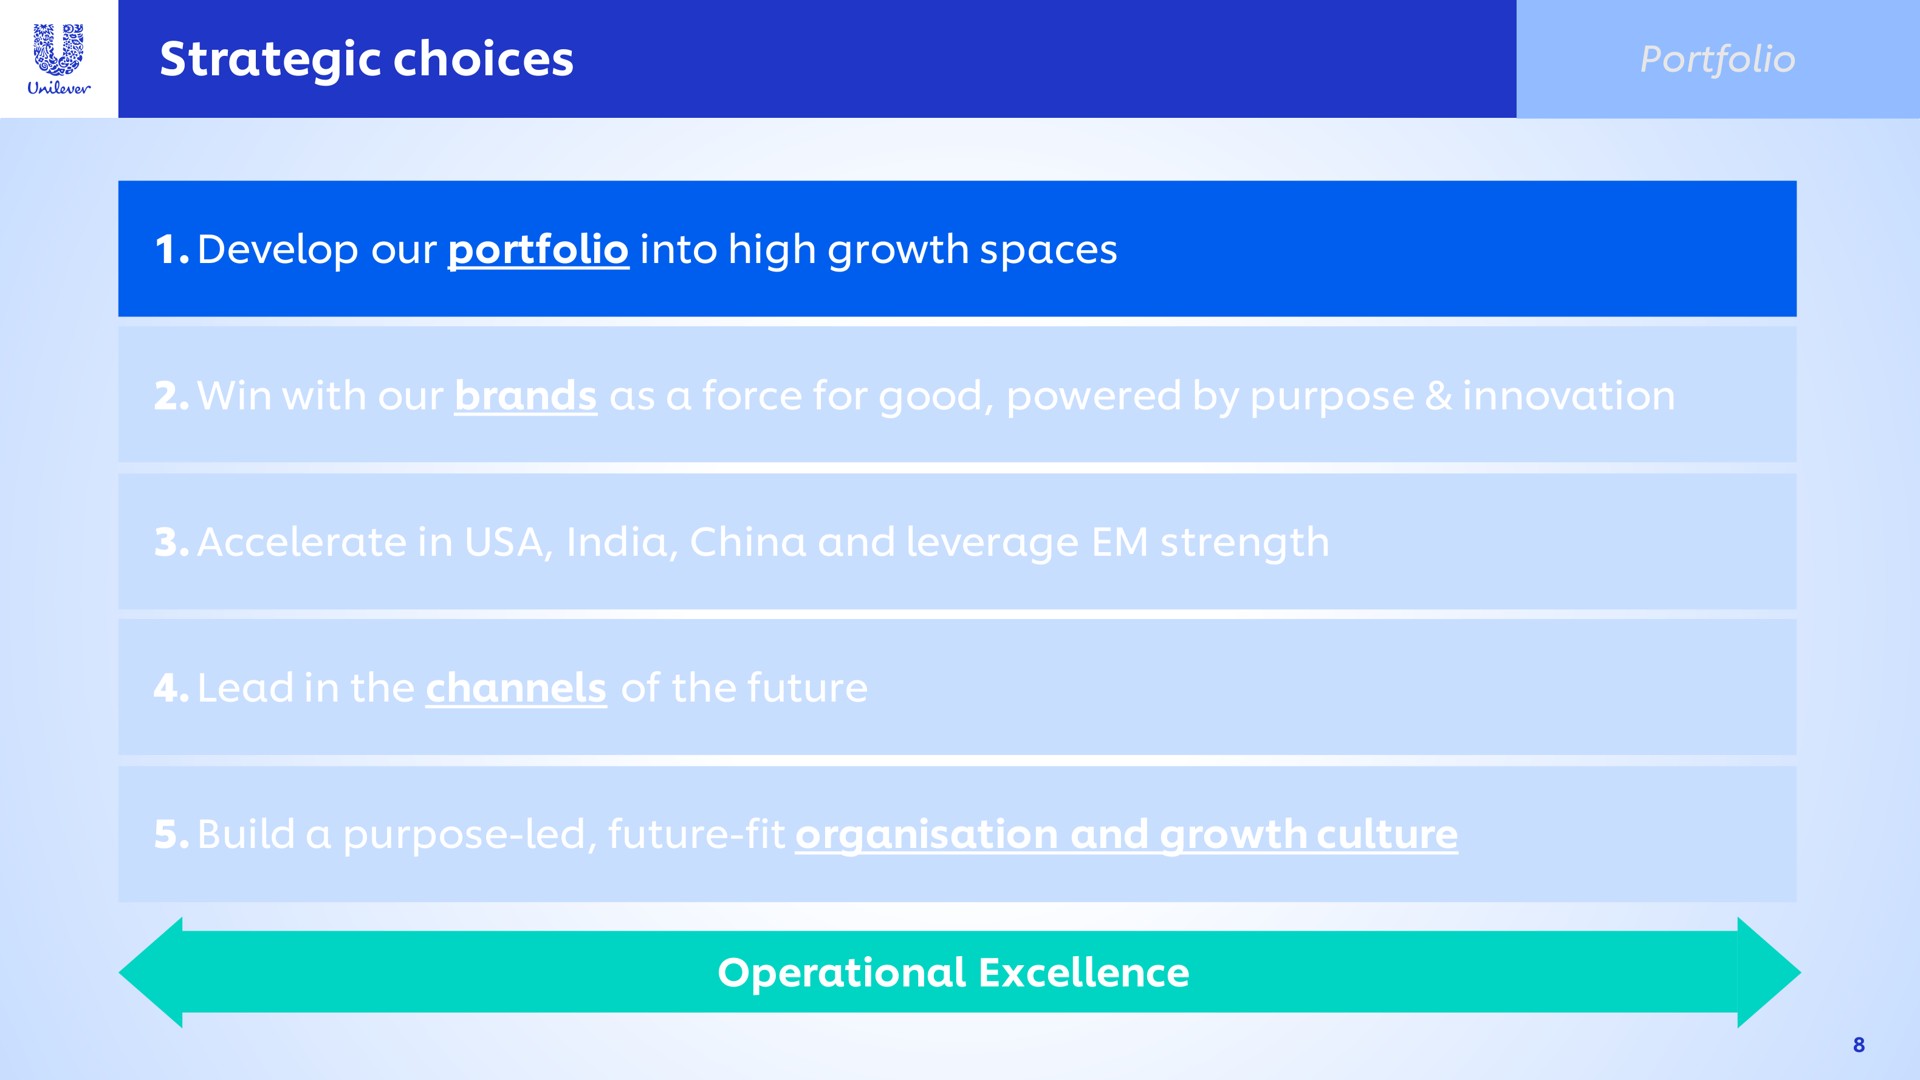 strategic choices i ate a develop our portfolio into high growth spaces operational excellence | Unilever